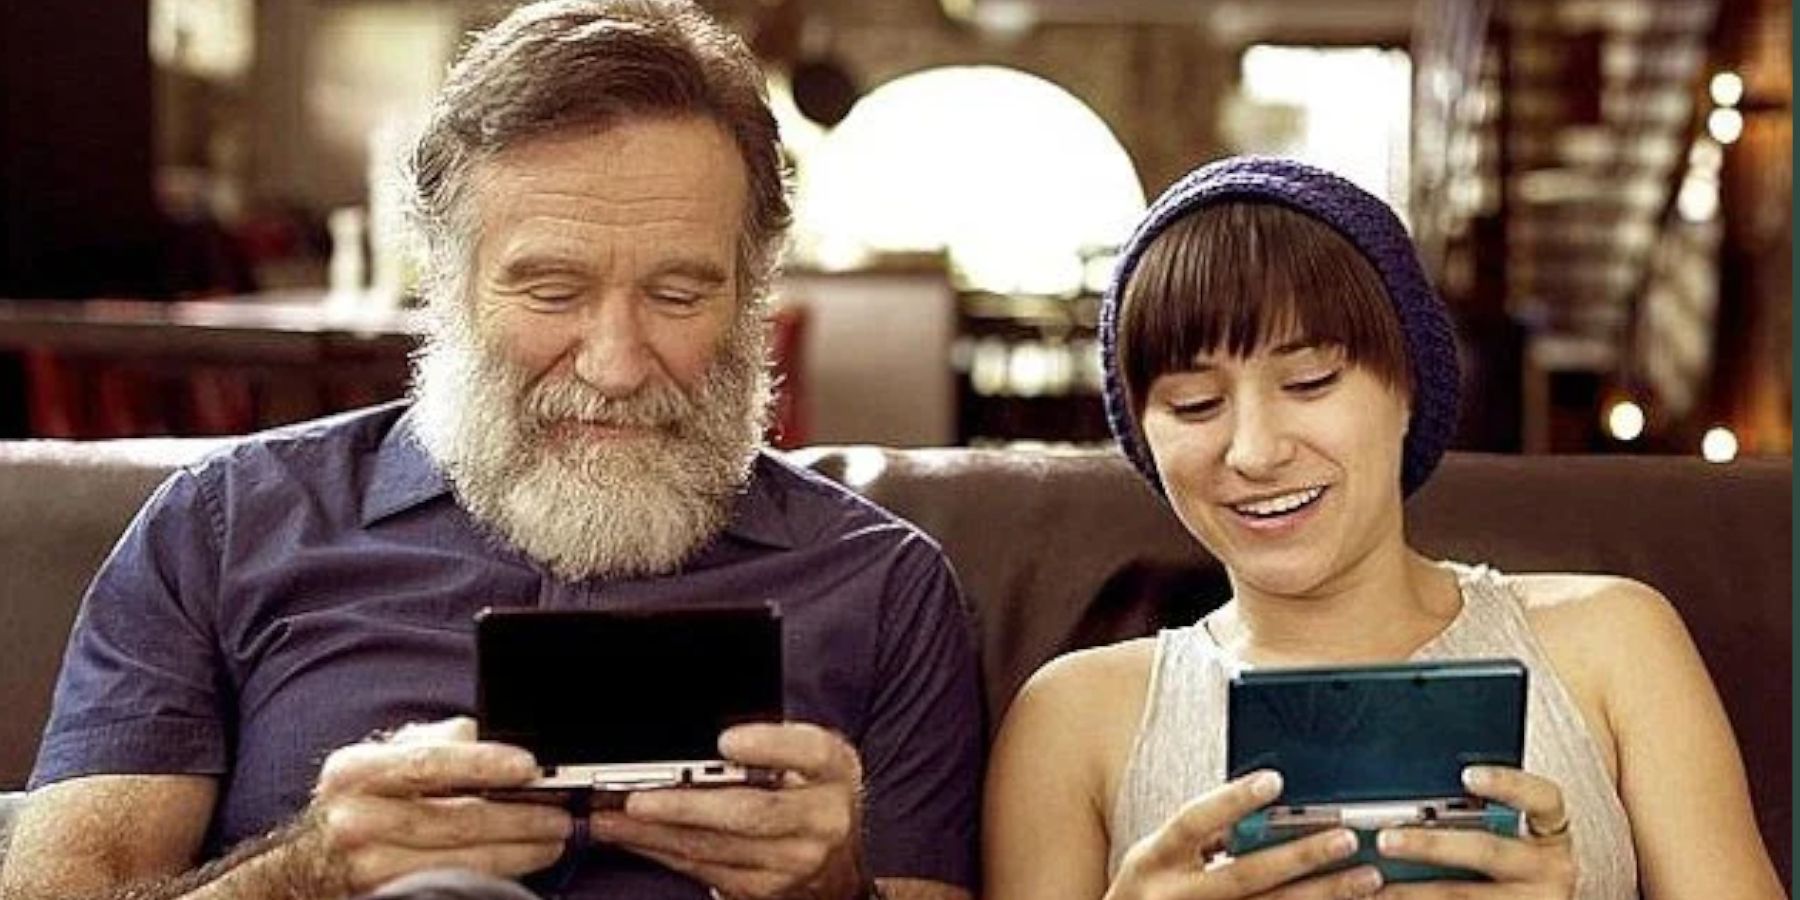 The late Robin Williams and his daughter Zelda playing the DS